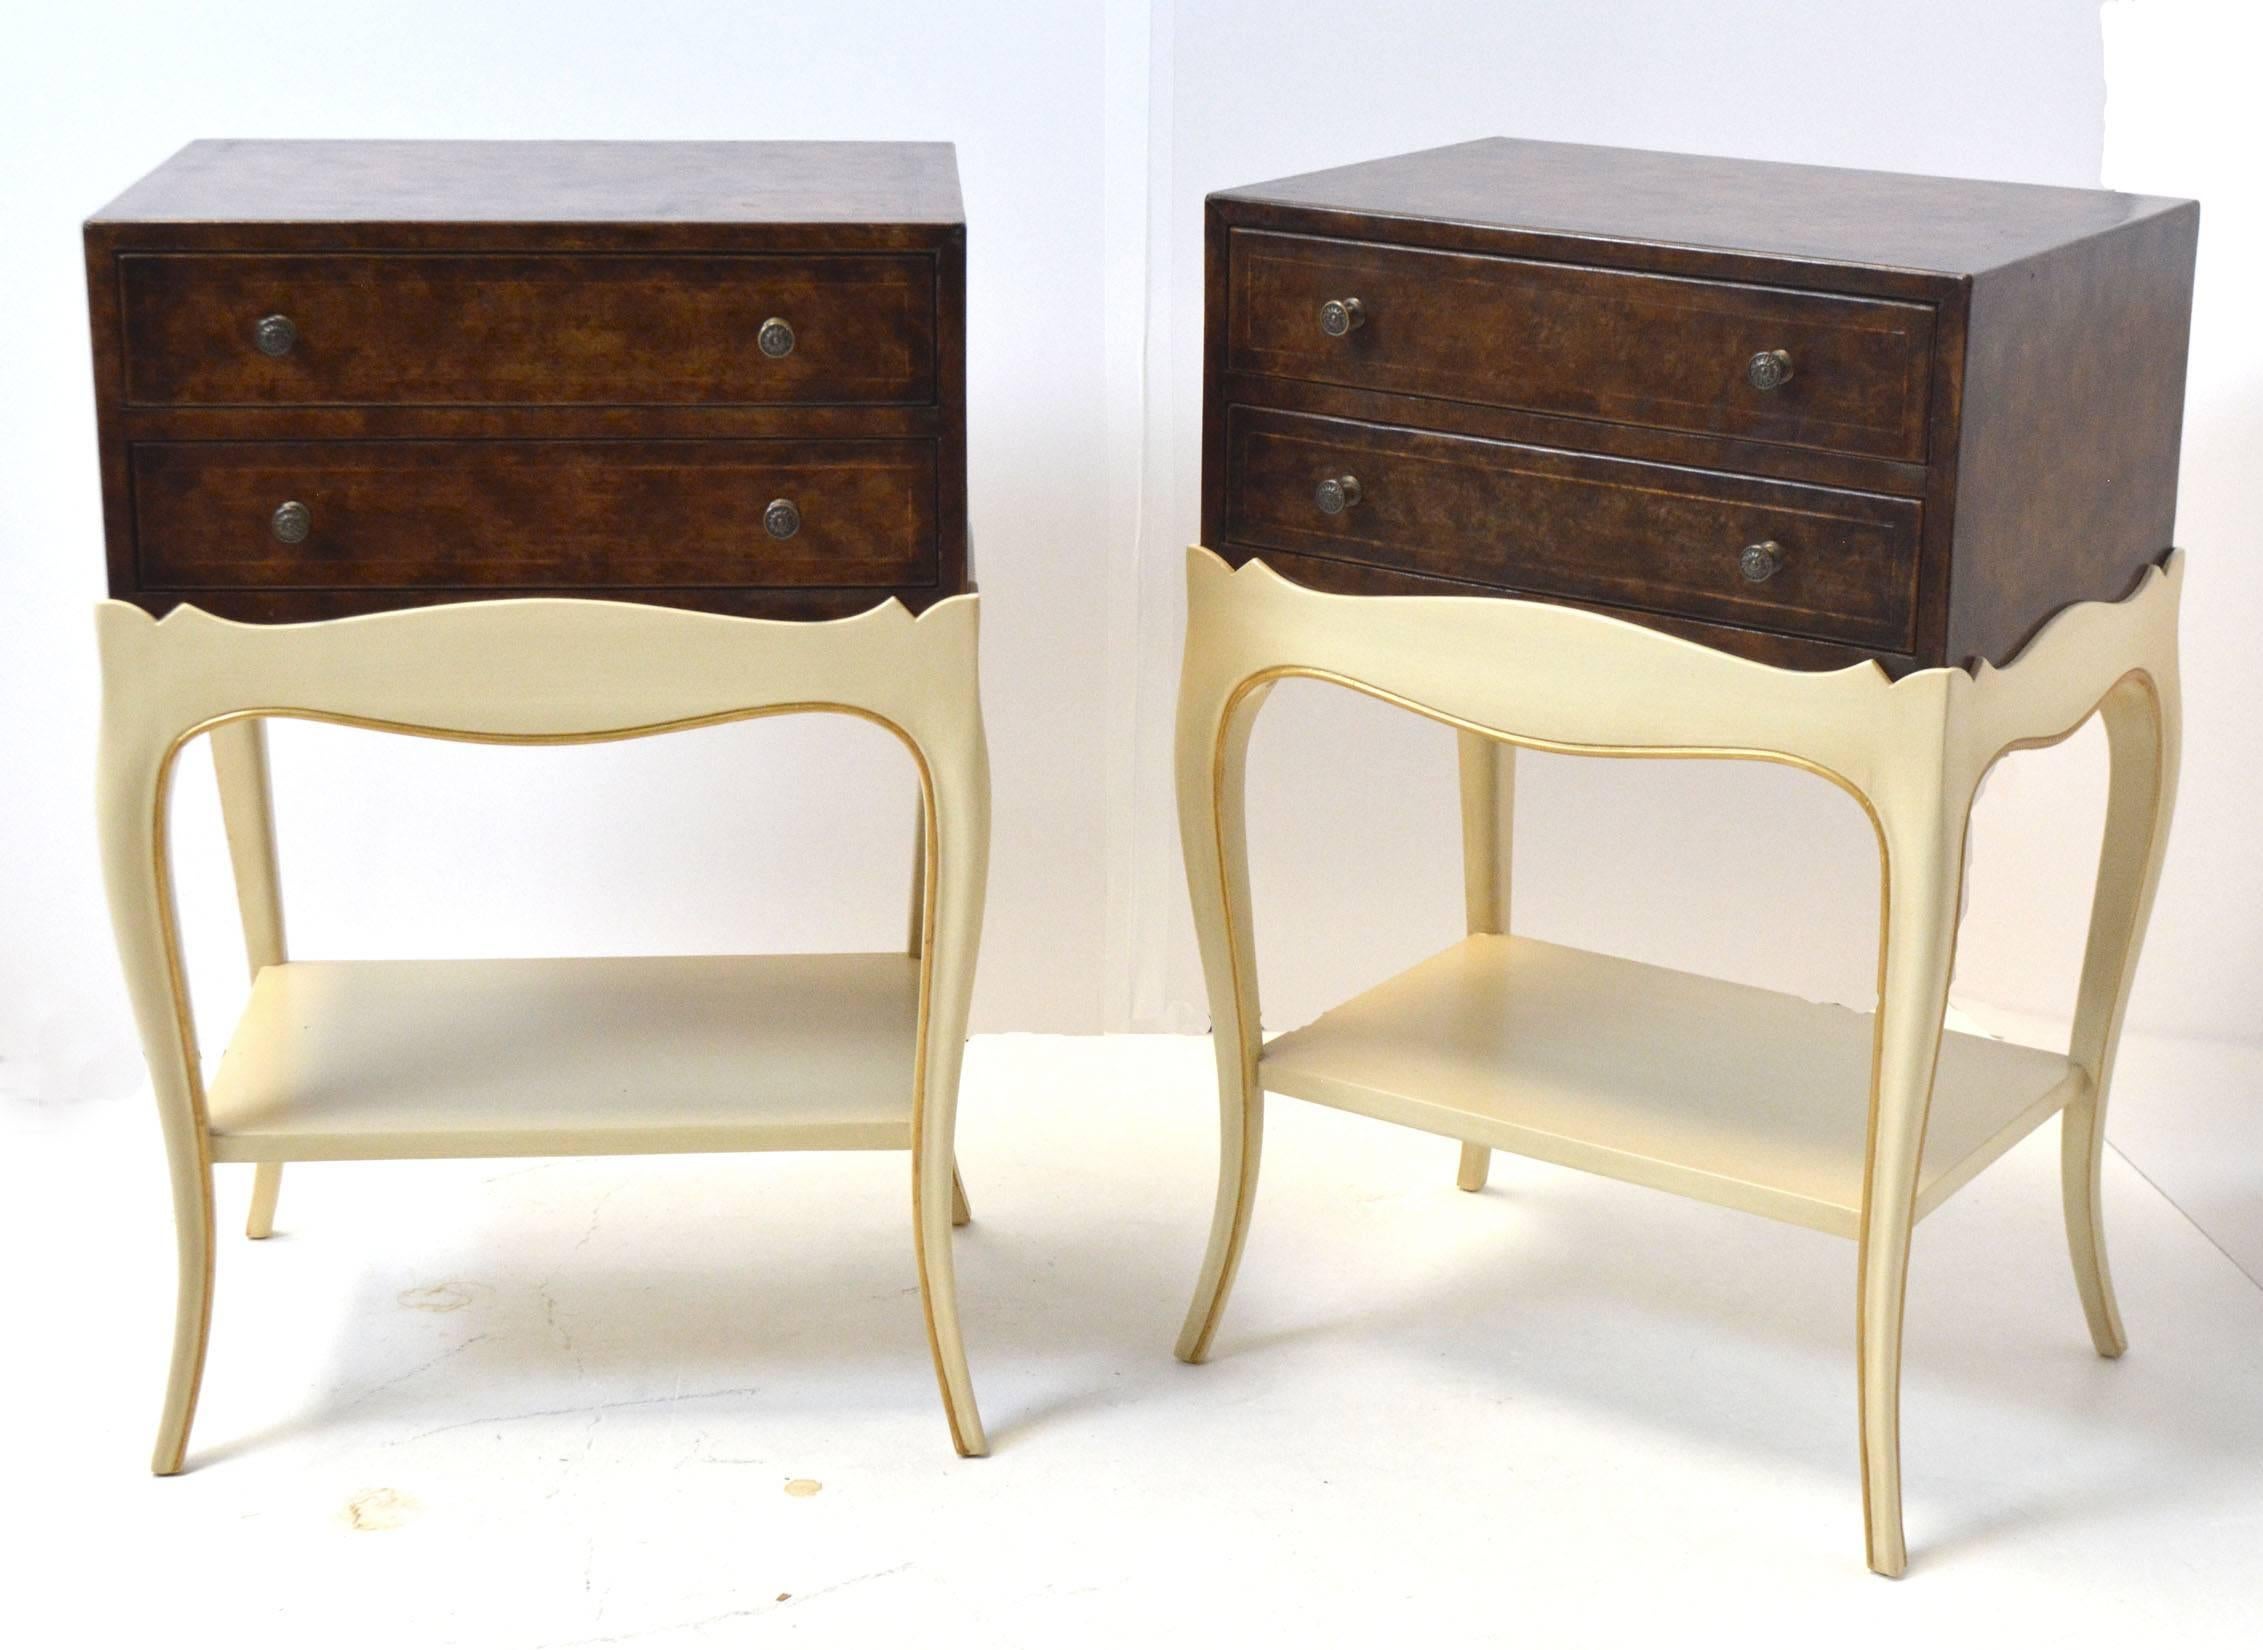 A pair of nightstands or occasional tables by Grosfeld House, circa 1940's. A two drawer leather wrapped chest sits on a painted base with cabriole legs and a shelf. Top measures 18" x 13", base measures 19" x 14", 28.25"